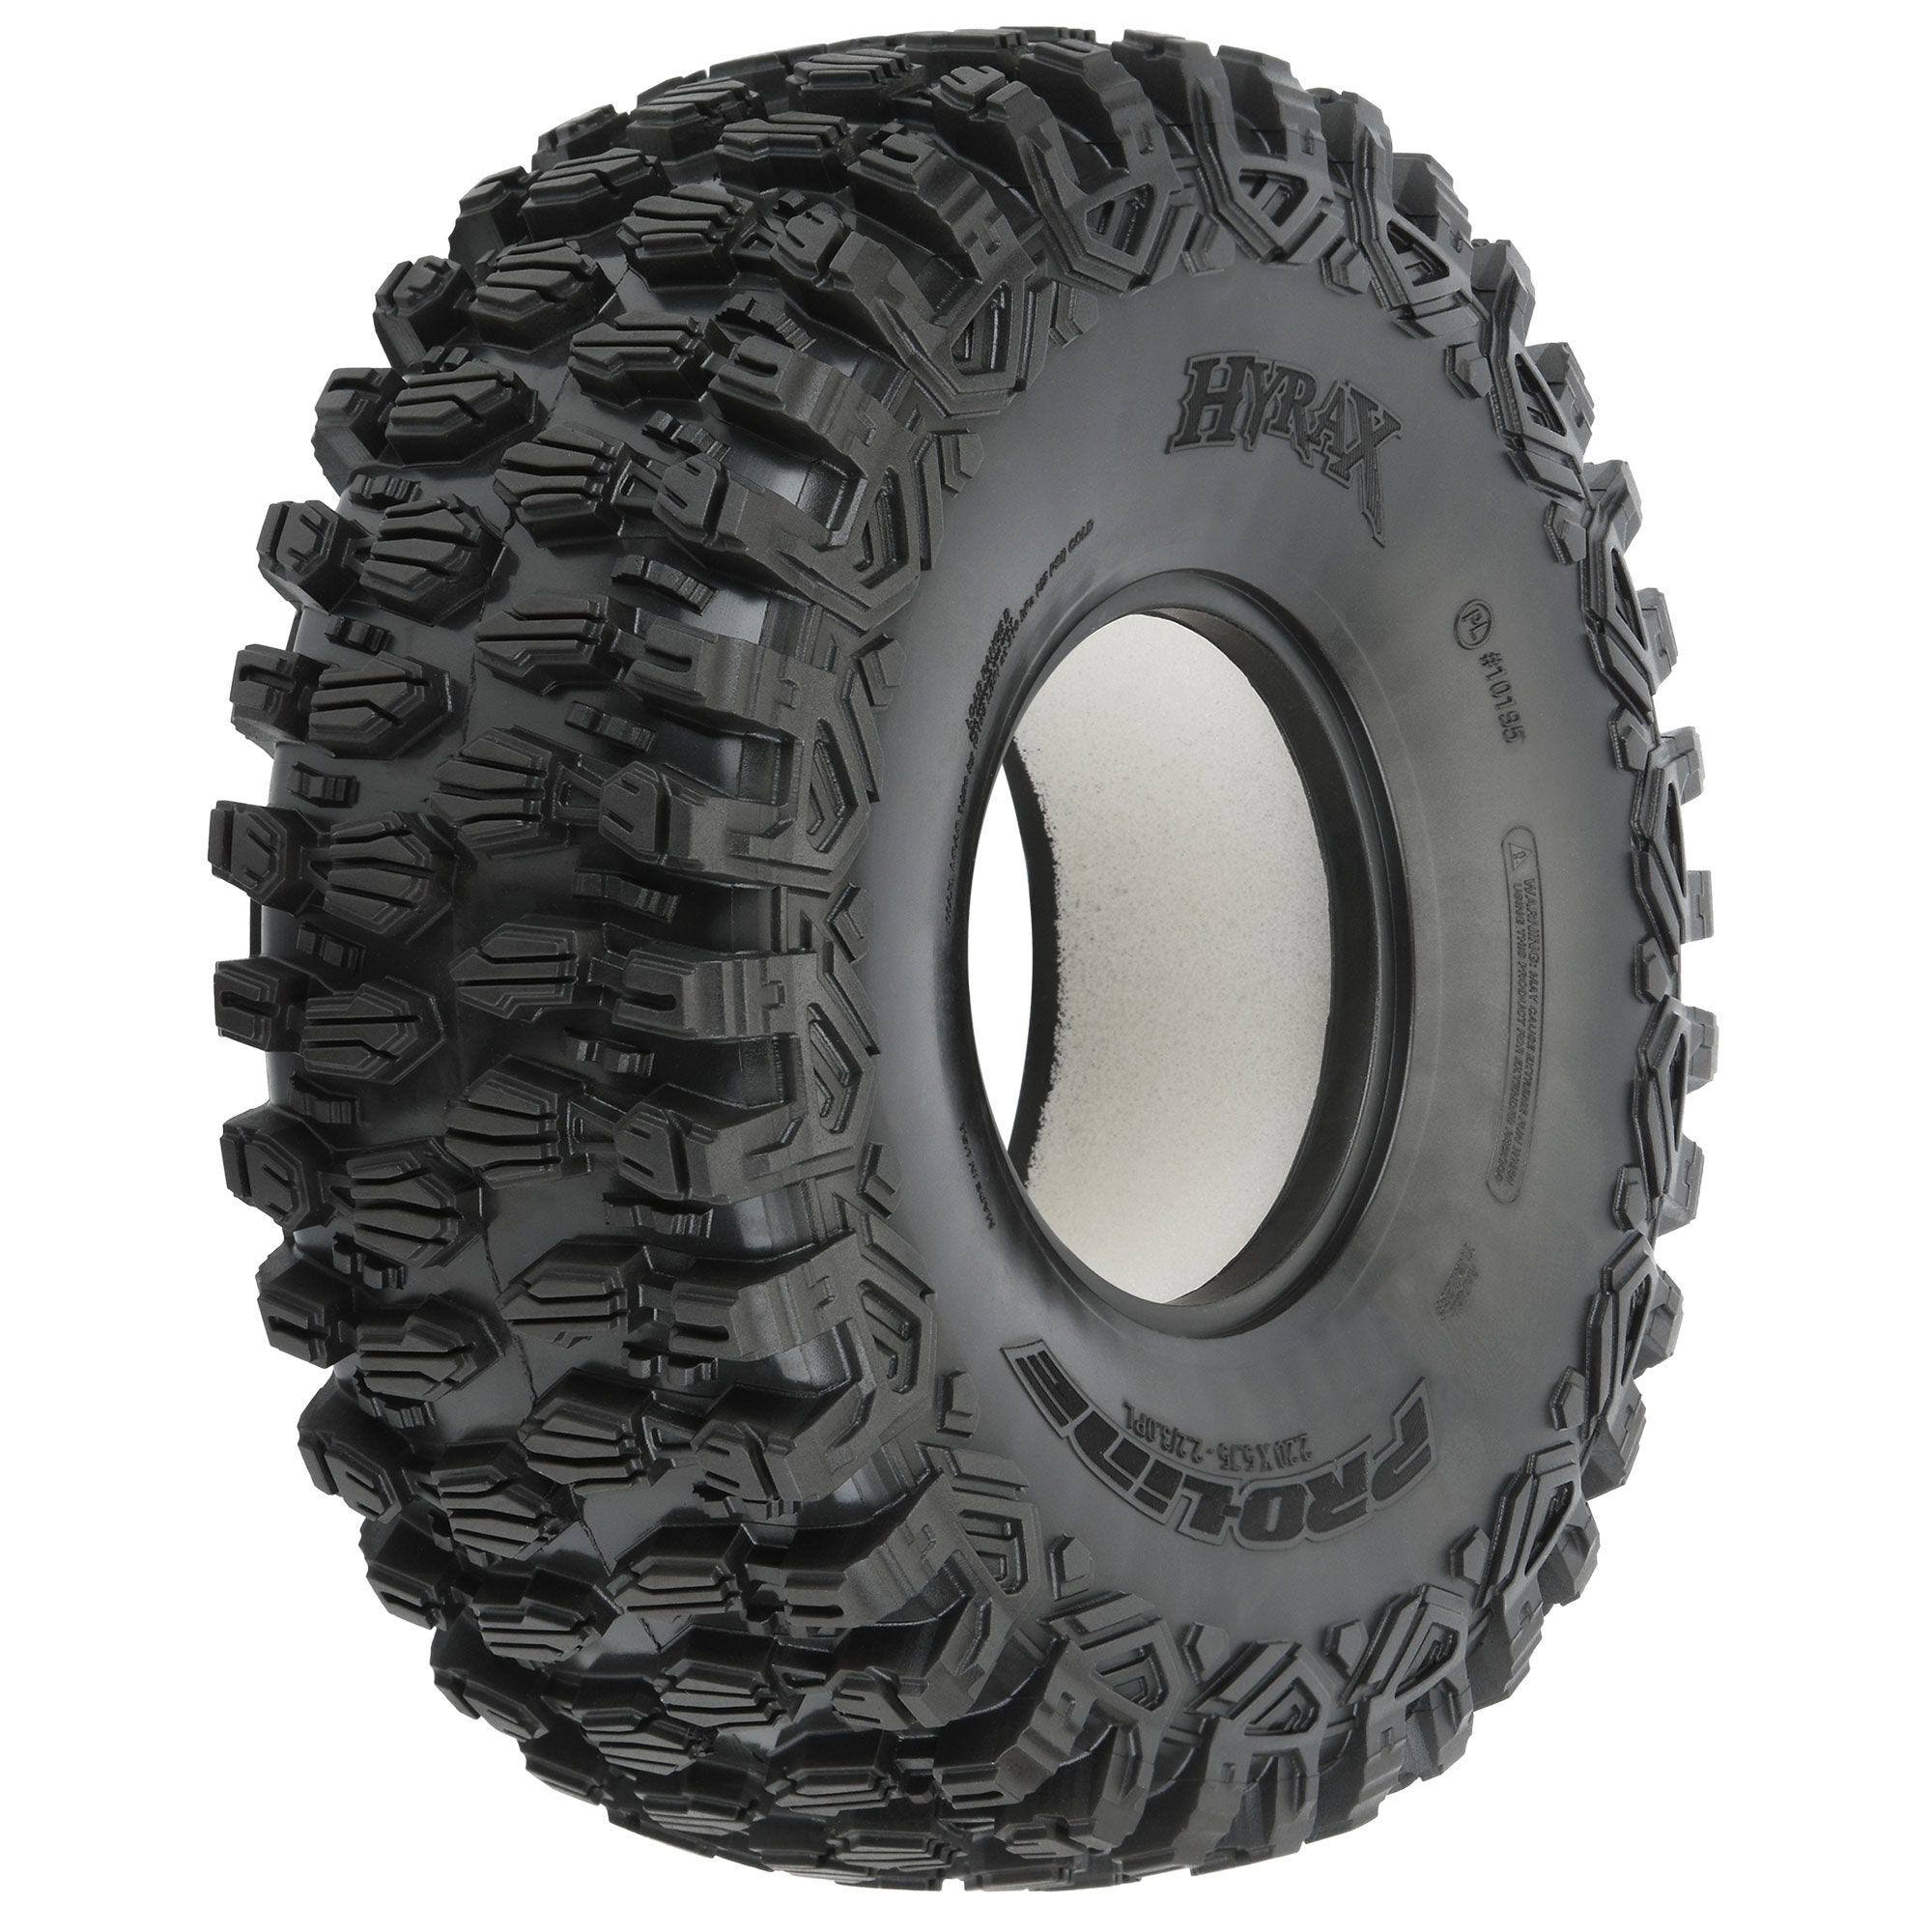 Pro-Line Racing 1/10 Hyrax U4 G8 Front/Rear 2.2 inch/3.0 inch Rock Racing Tires 2 PRO1019514